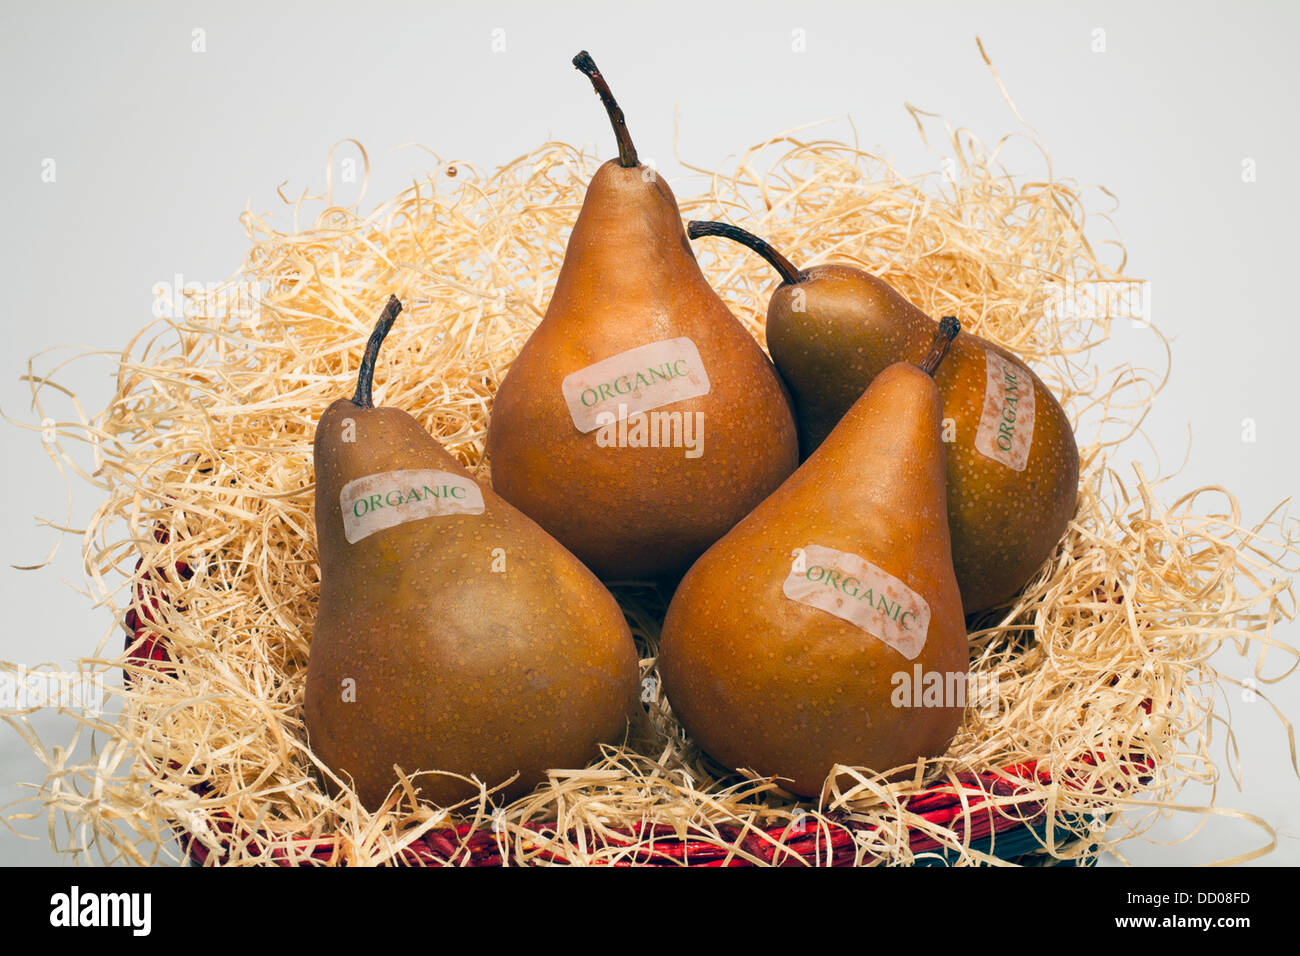 Bosch Pears In A Basket With Organic Labels; Waterloo, Quebec, Canada Stock Photo